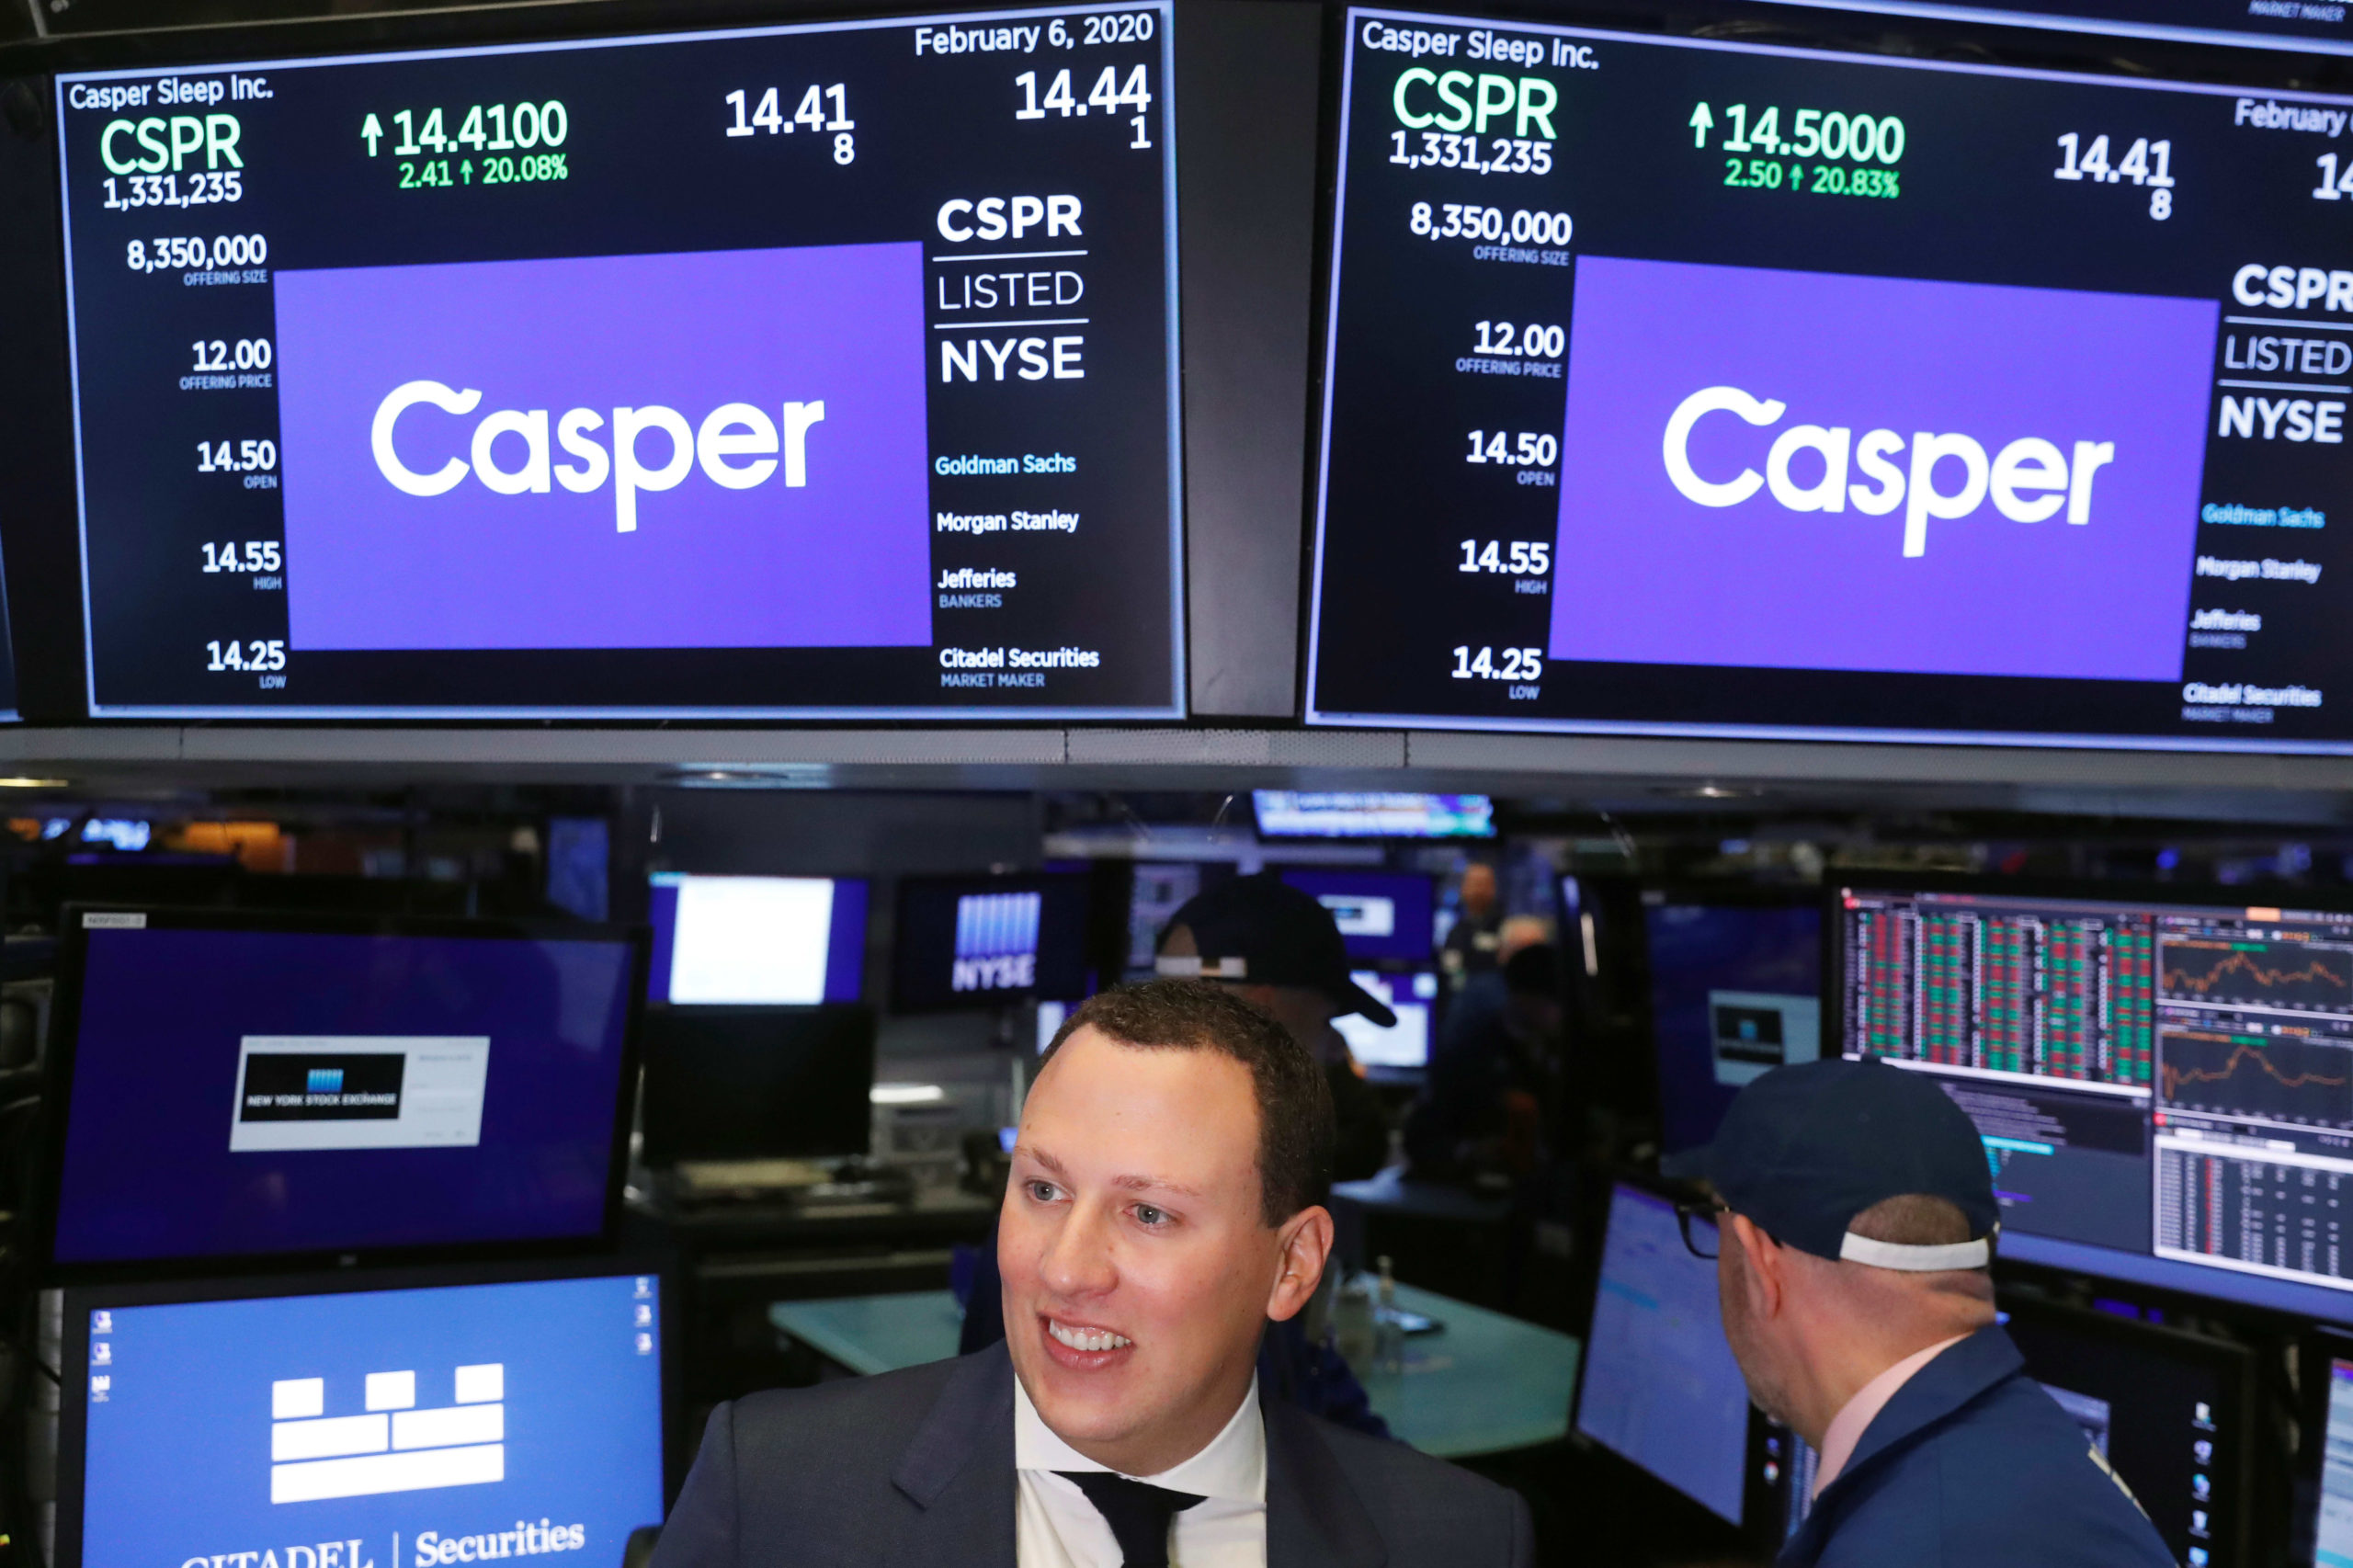 The market would not need low-quality IPOs like Casper Sleep